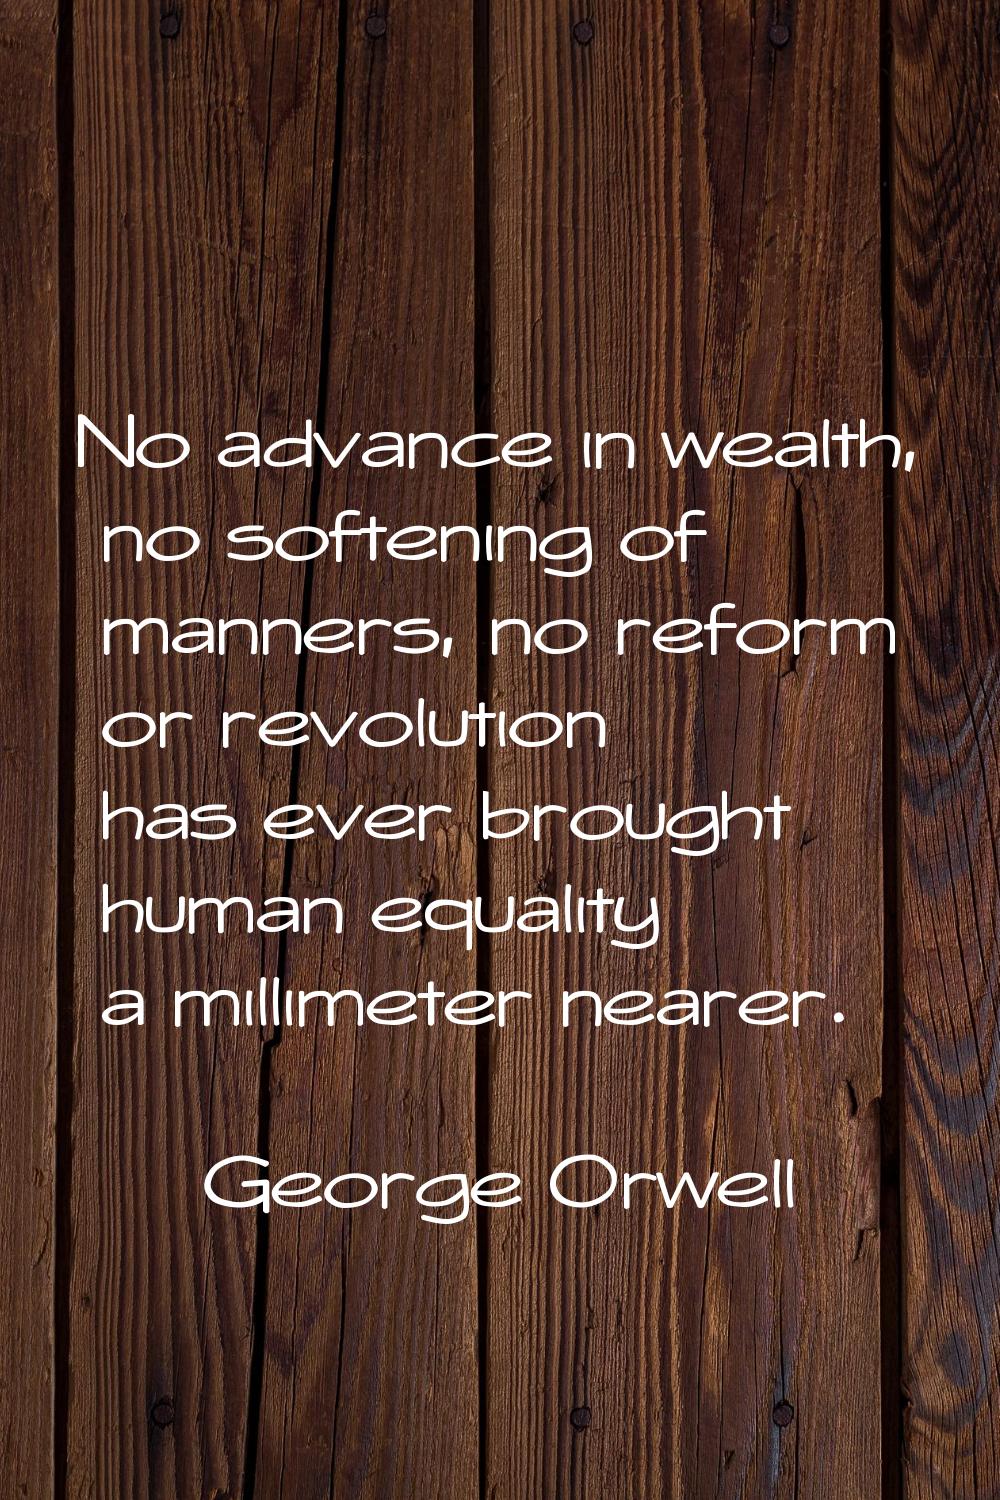 No advance in wealth, no softening of manners, no reform or revolution has ever brought human equal